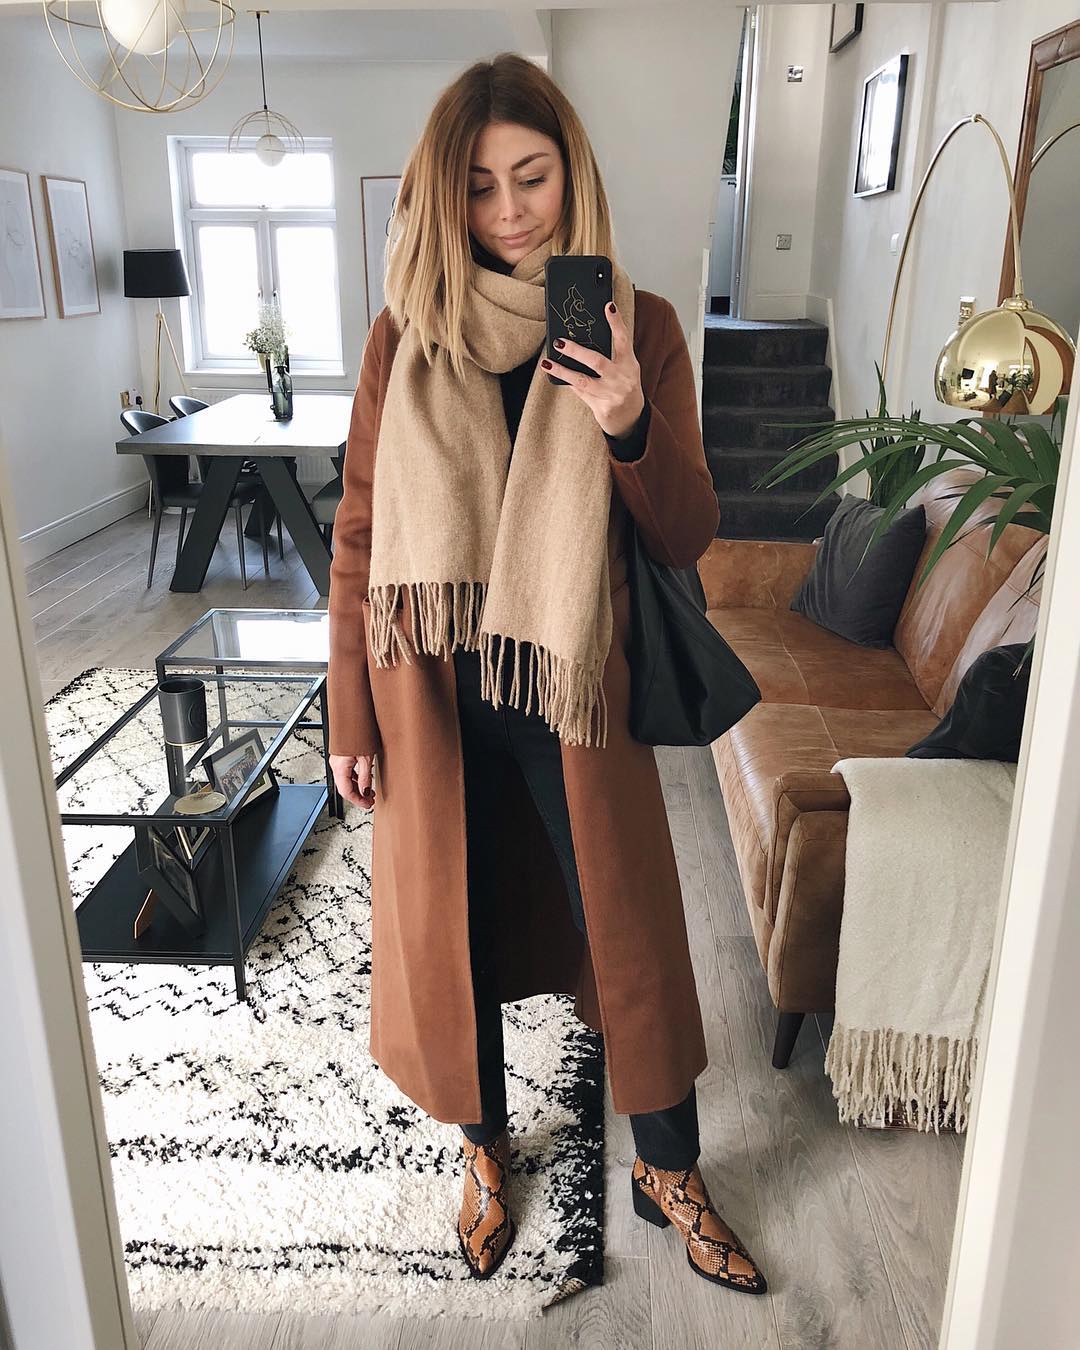 Meet the Oufit We Could Live In All Winter Long